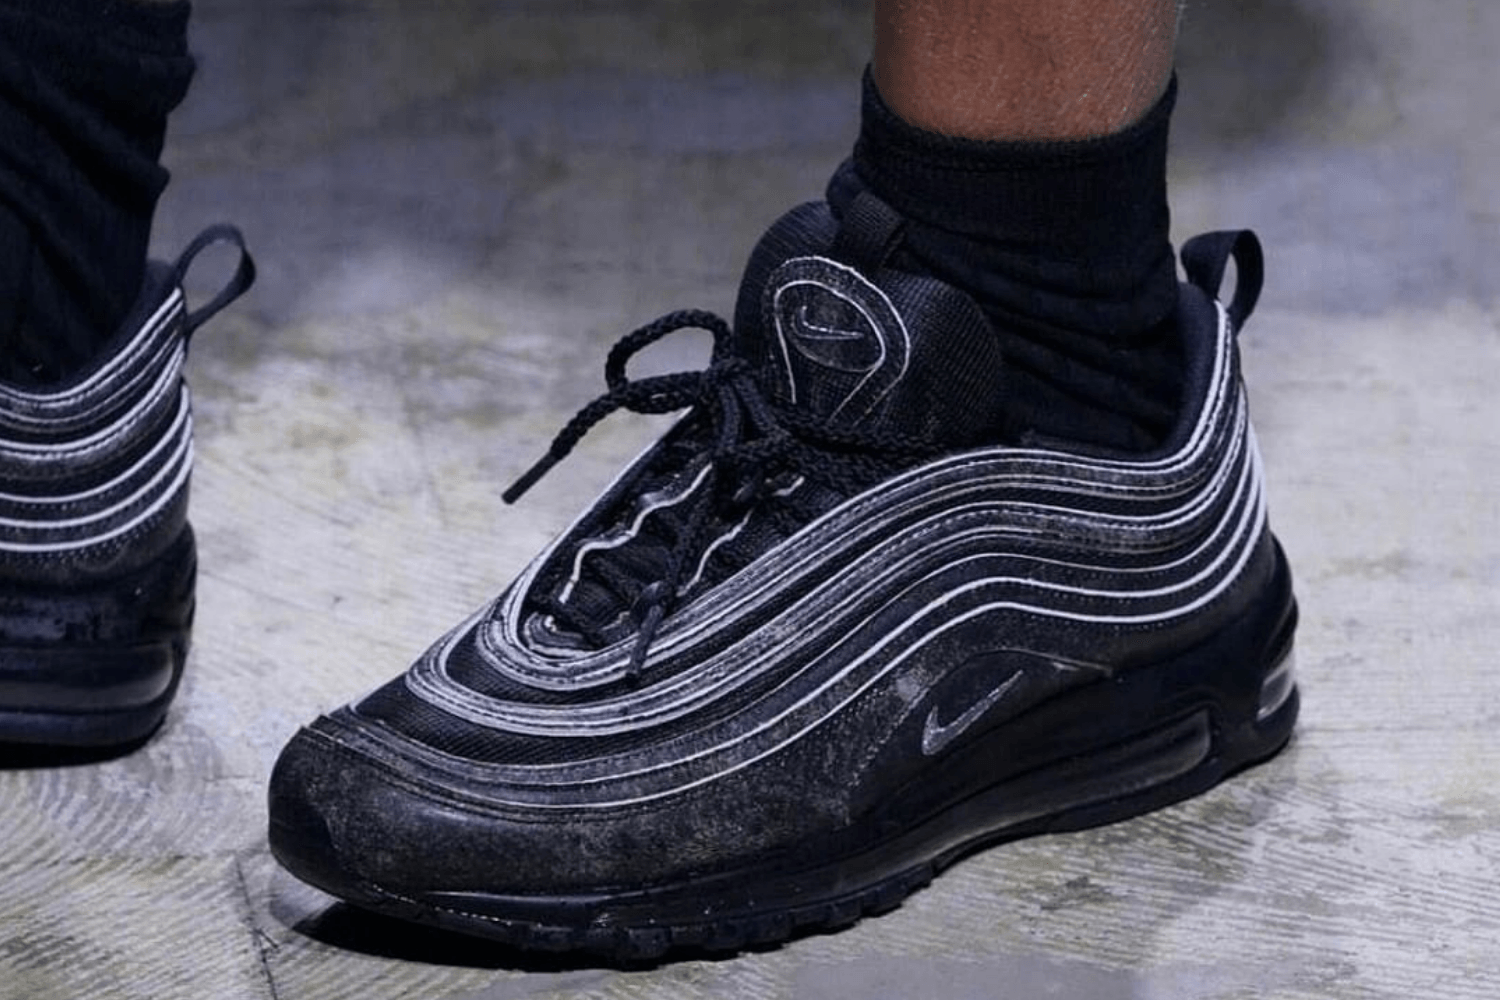 Comme des Garçons and Nike collaborate on the Air Max 97